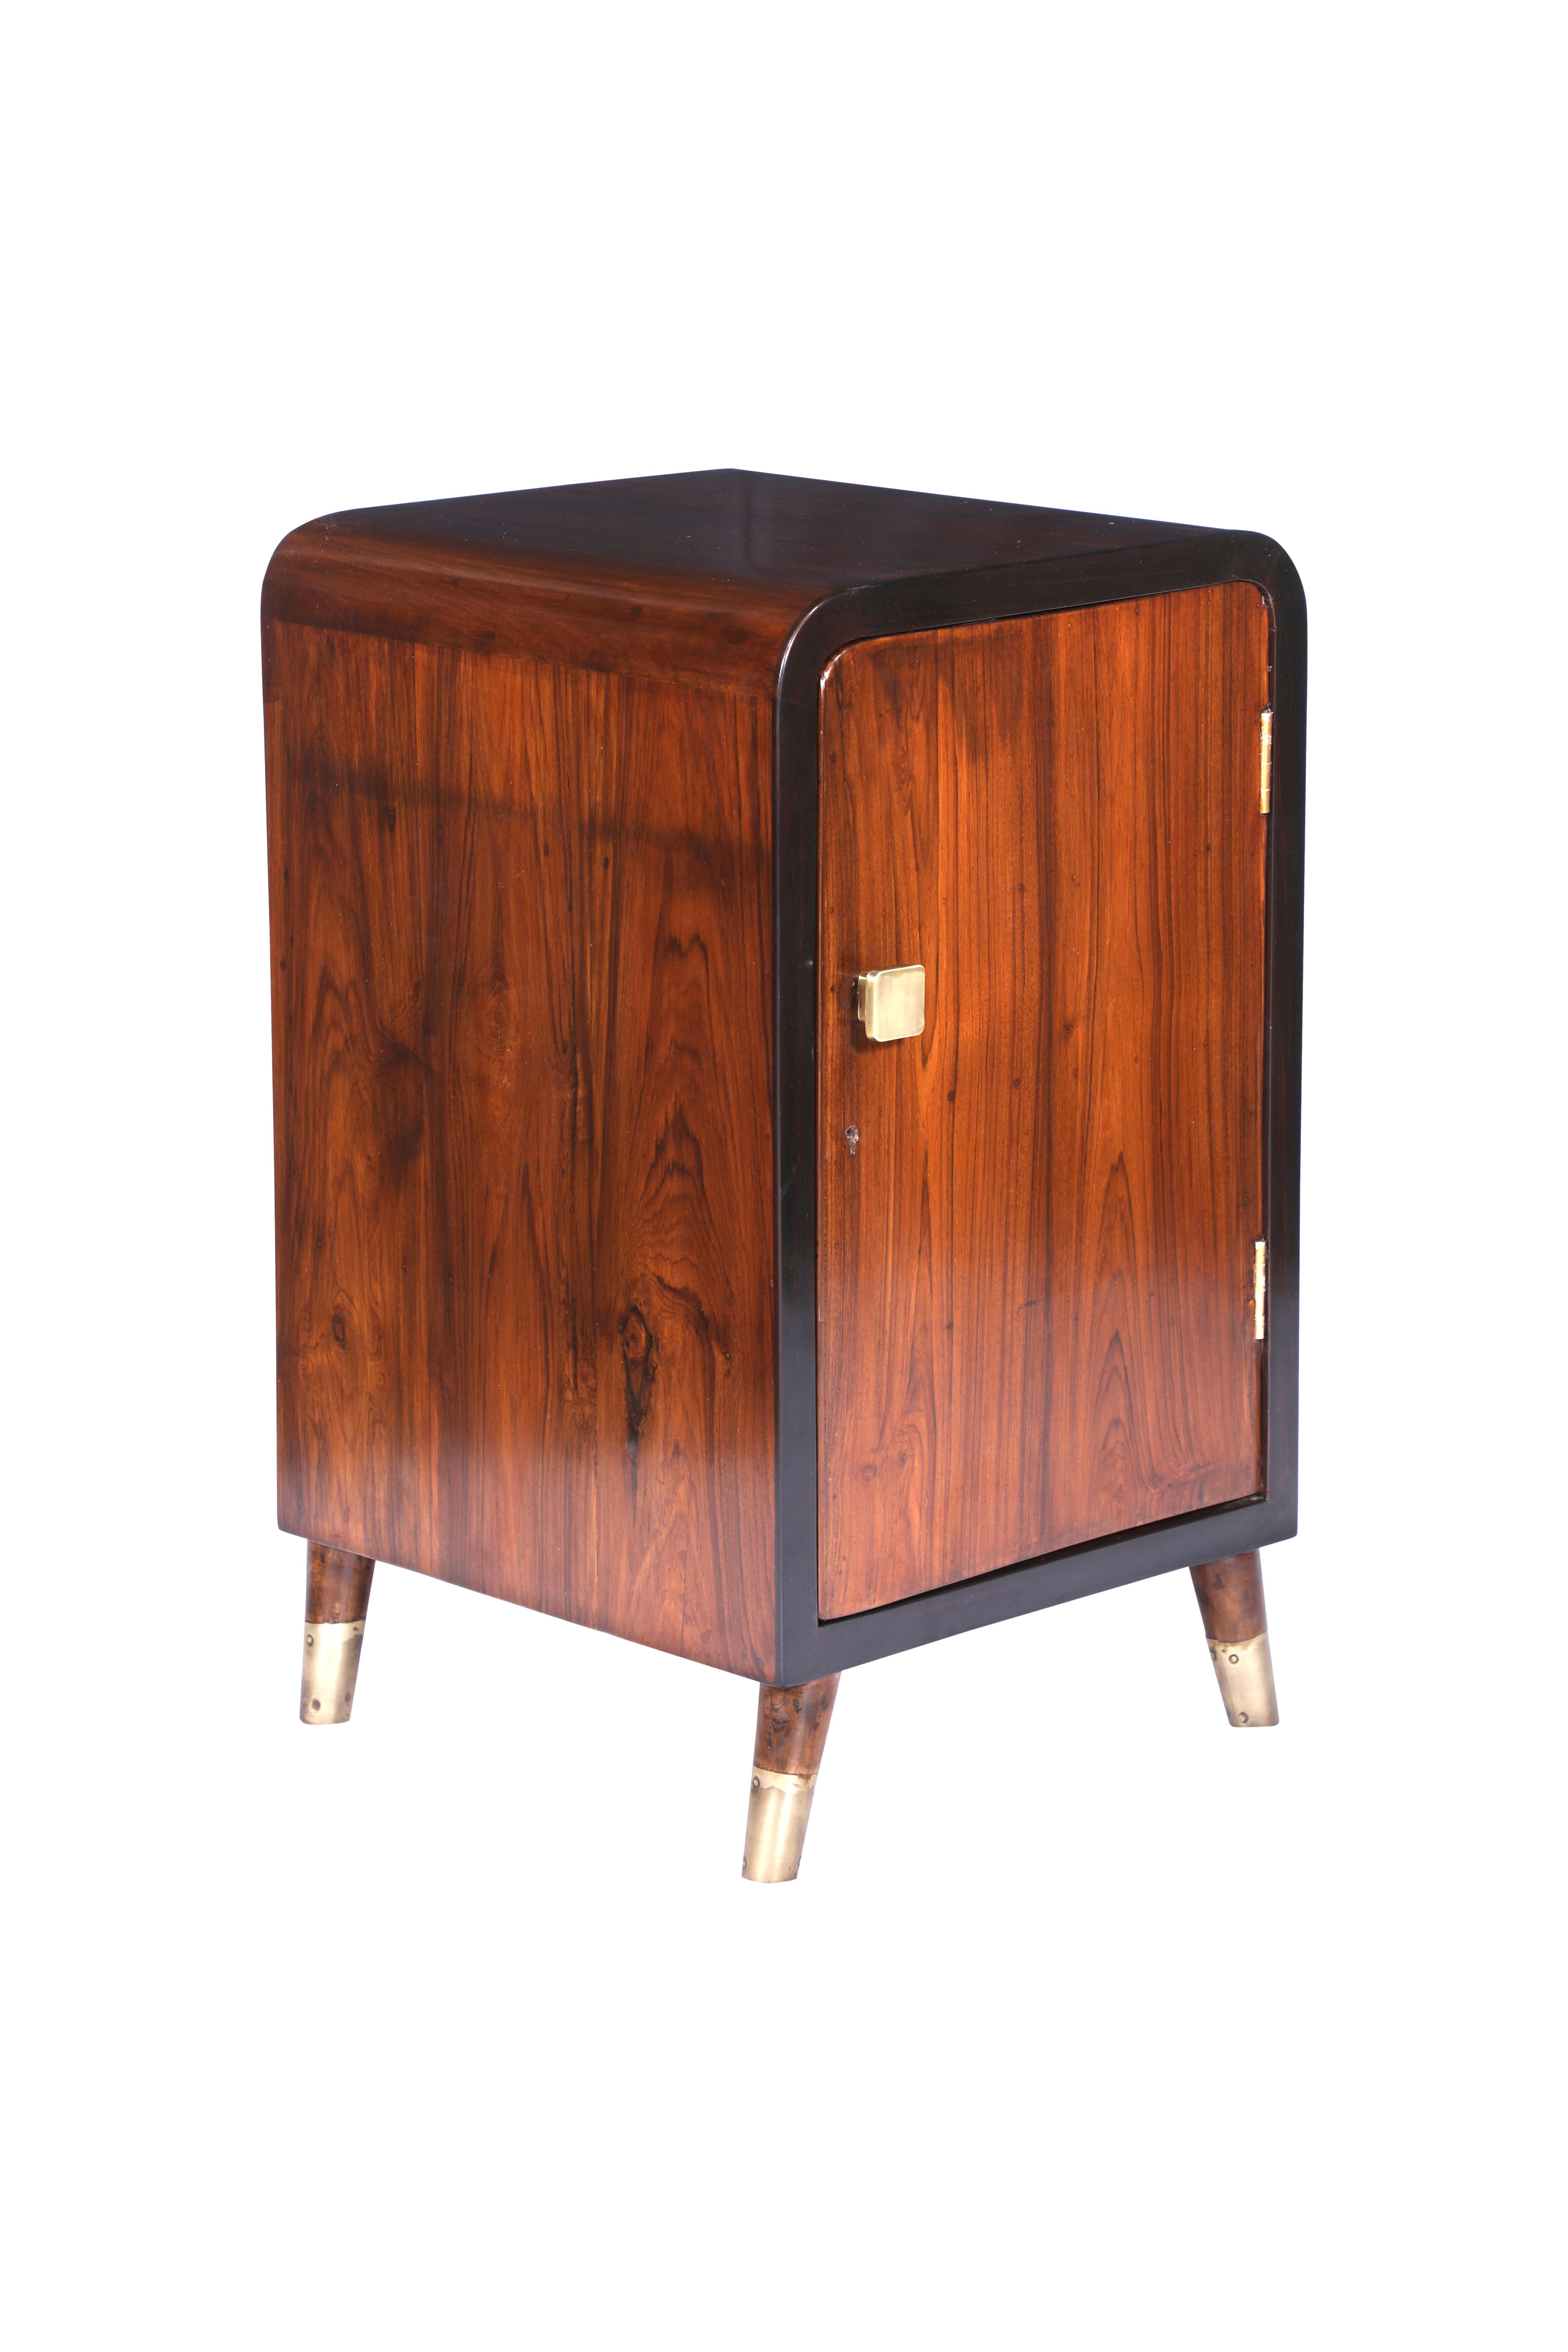 20th Century Pair of Teak and Rosewood End or Side Tables, Mid-Century Modern